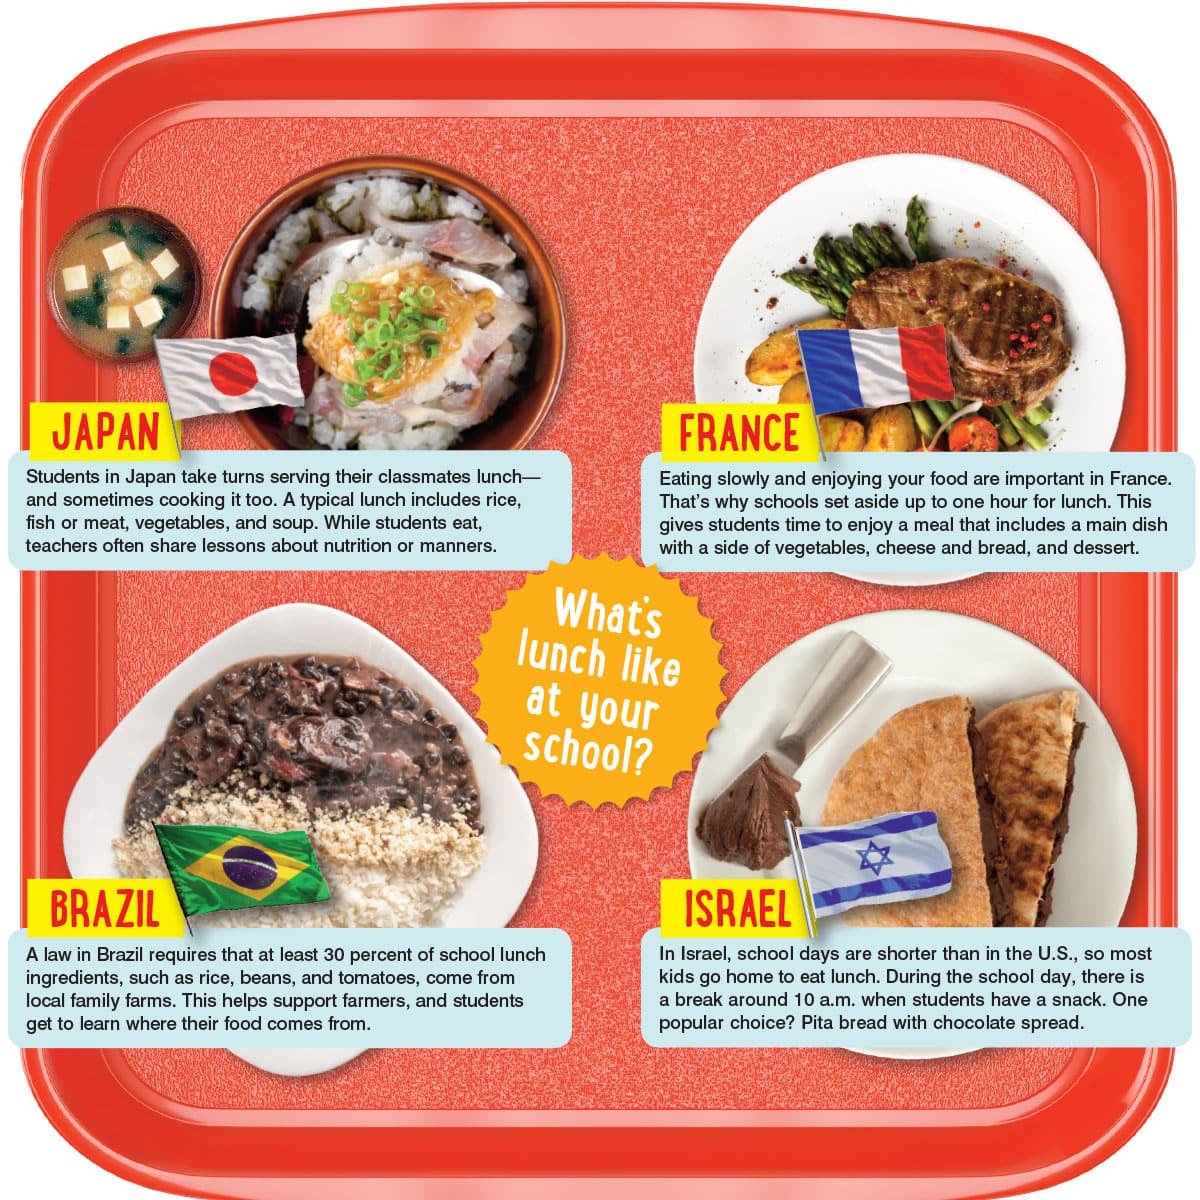 https://storyworks.scholastic.com/content/dam/classroom-magazines/storyworks/issues/2021-22/020122/around-the-world-with-school-lunches/STO-04-020122-P32-Infographic-PO_.jpg